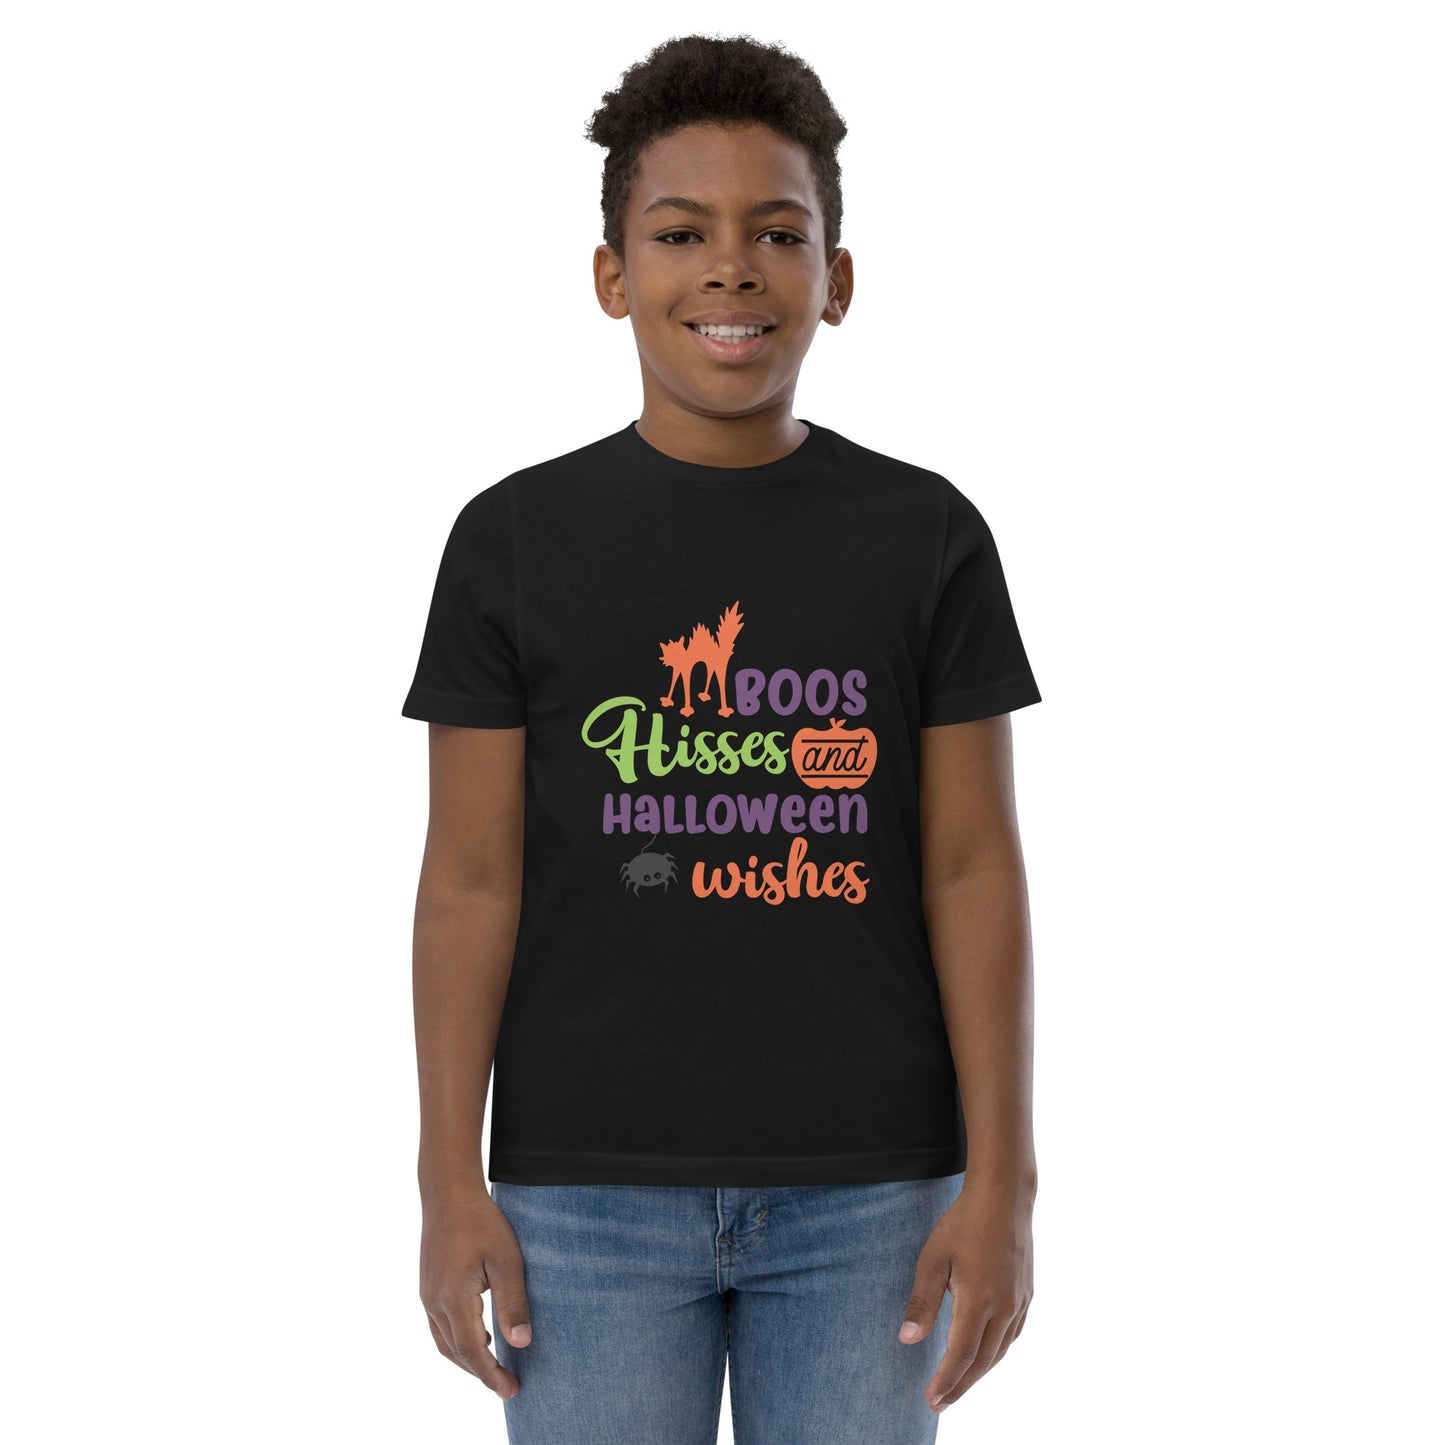 Boos Hisses and Halloween Wishes Youth Tshirt